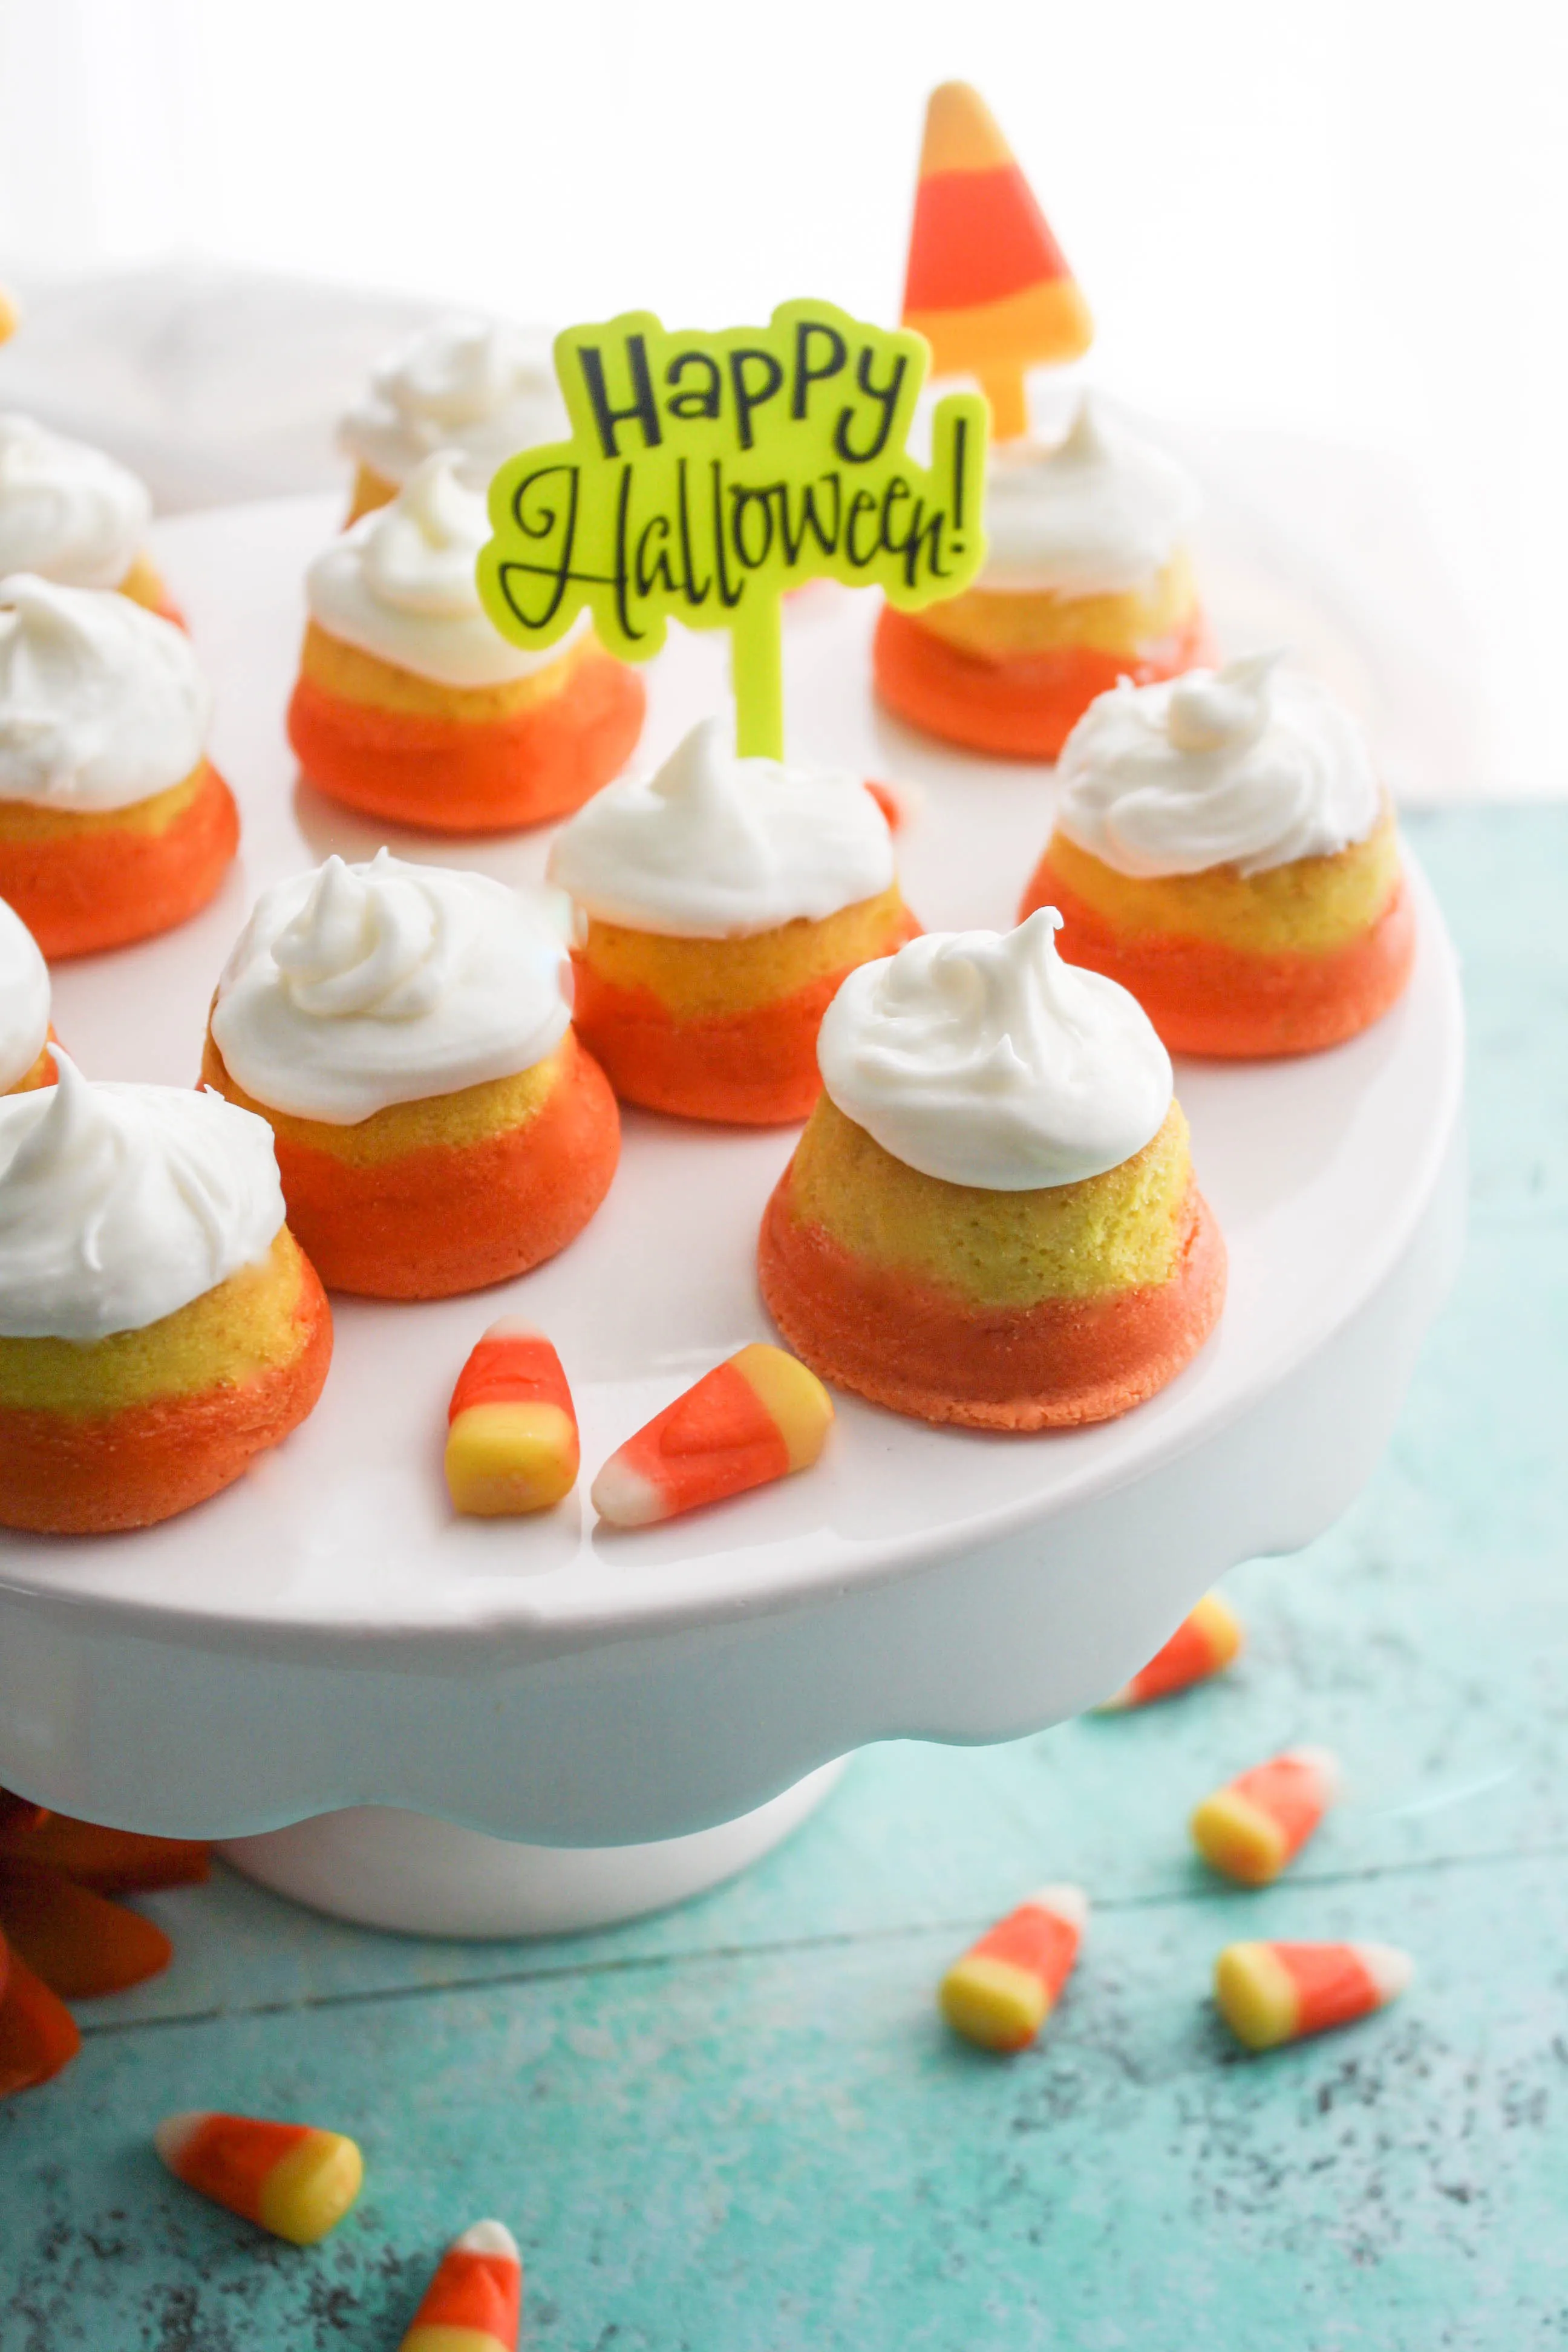 Mini “Candy Corn” Cupcakes with Buttercream Frosting make the perfect Halloween dessert! These mini cupcakes are fabulous for the Halloween festivities!